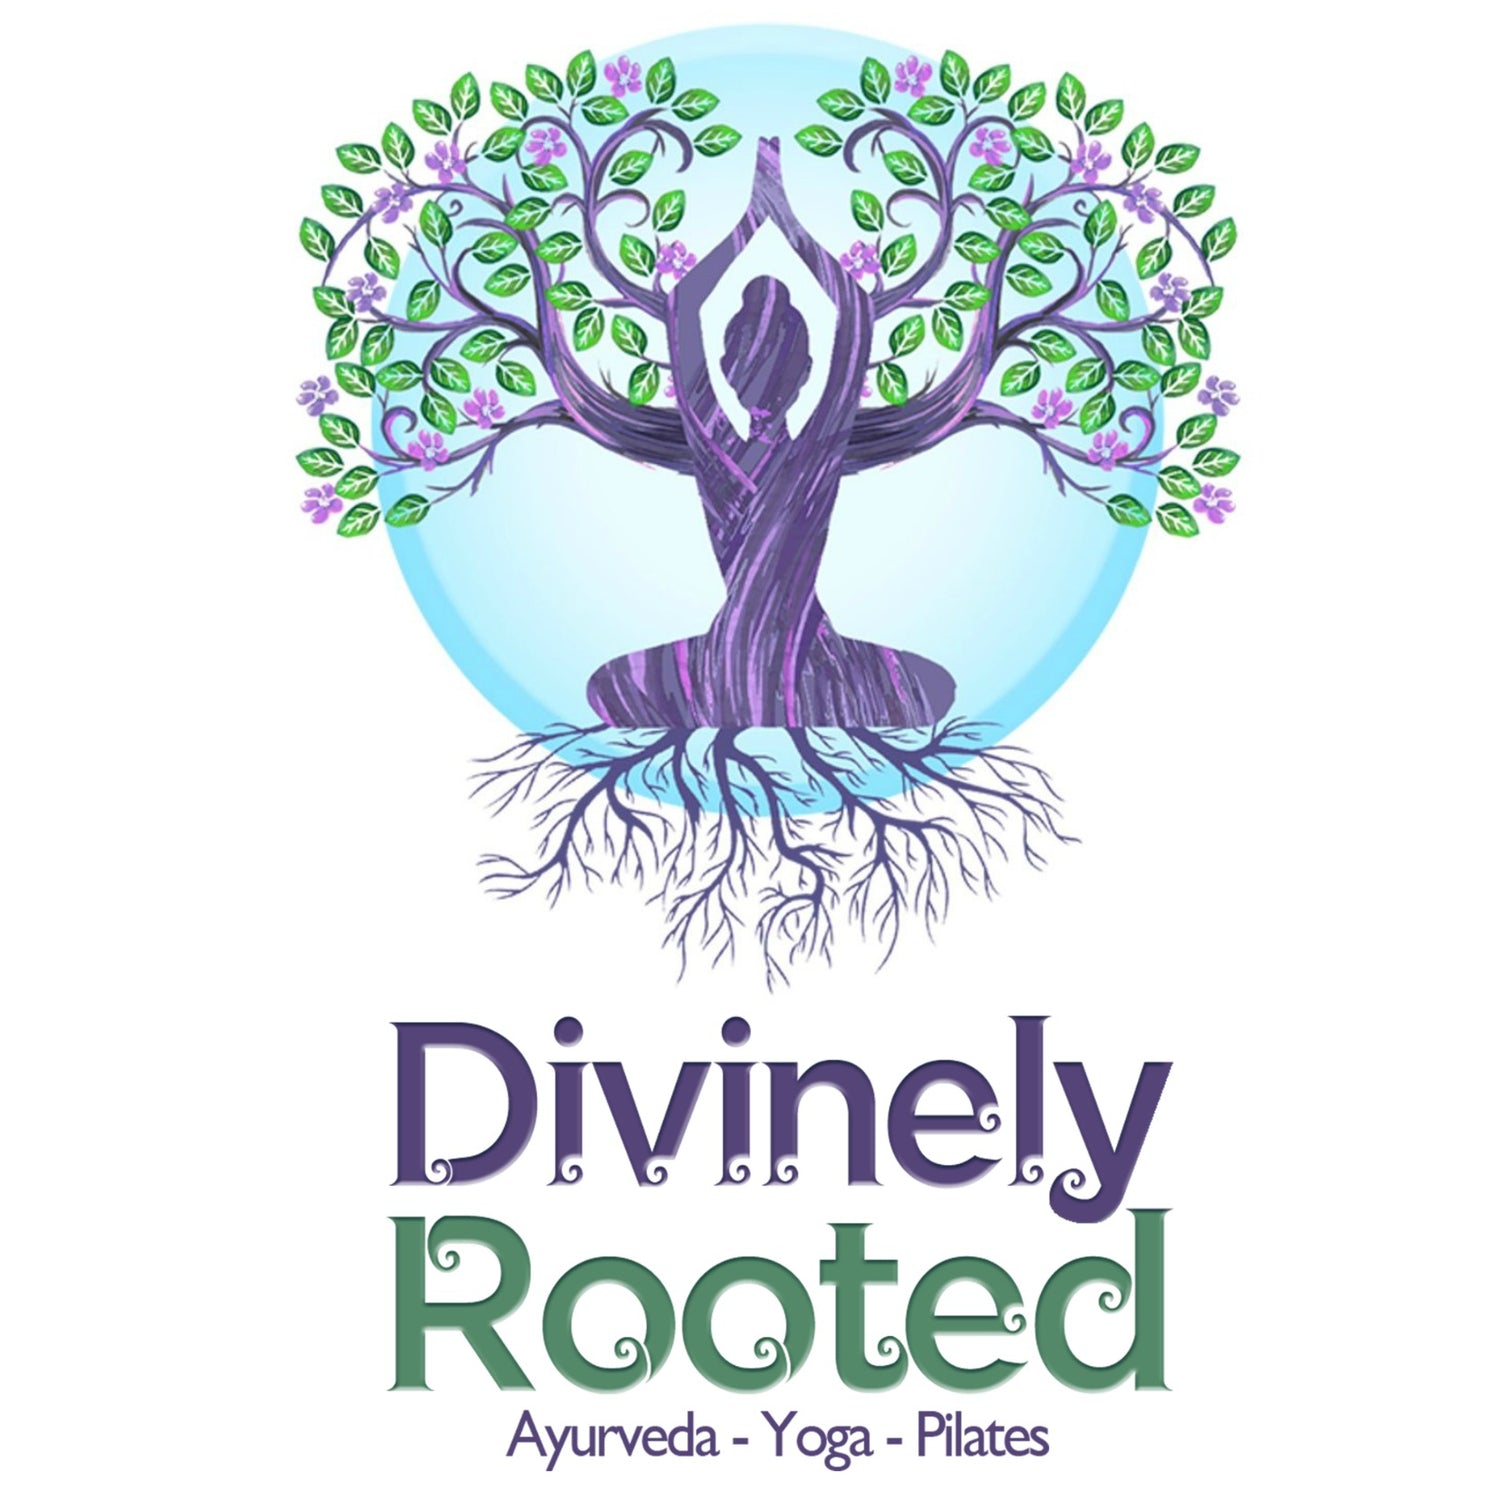 Divinely Rooted